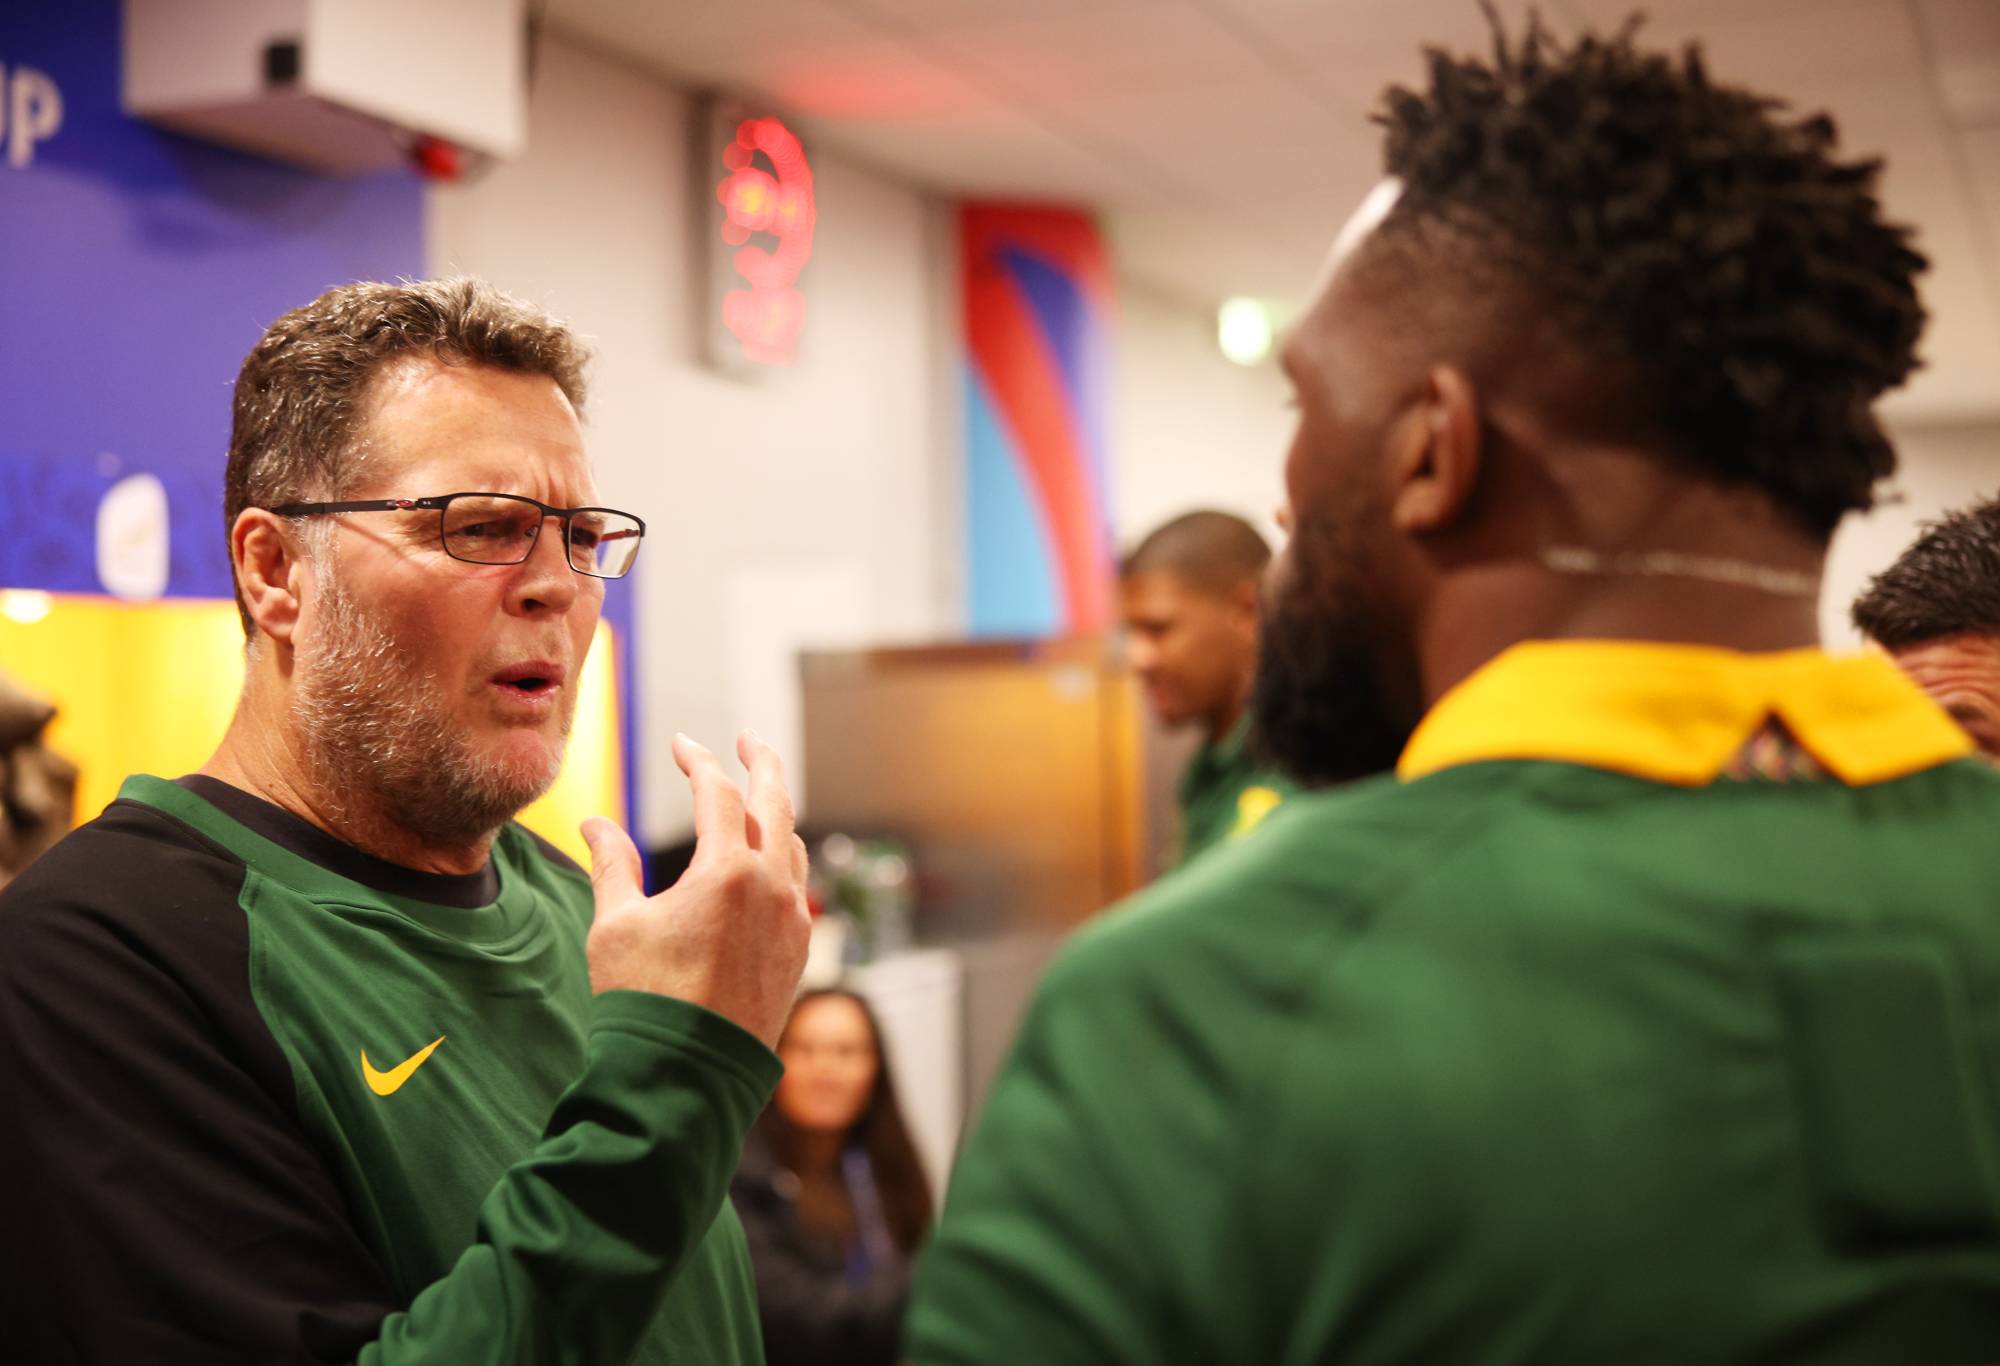 Rassie Erasmus, Coach of South Africa interacts with Siya Kolisi of South Africa inside the South Africa dressing room following the Rugby World Cup France 2023 match between England and South Africa at Stade de France on October 21, 2023 in Paris, France. (Photo by Adam Pretty - World Rugby/World Rugby via Getty Images)